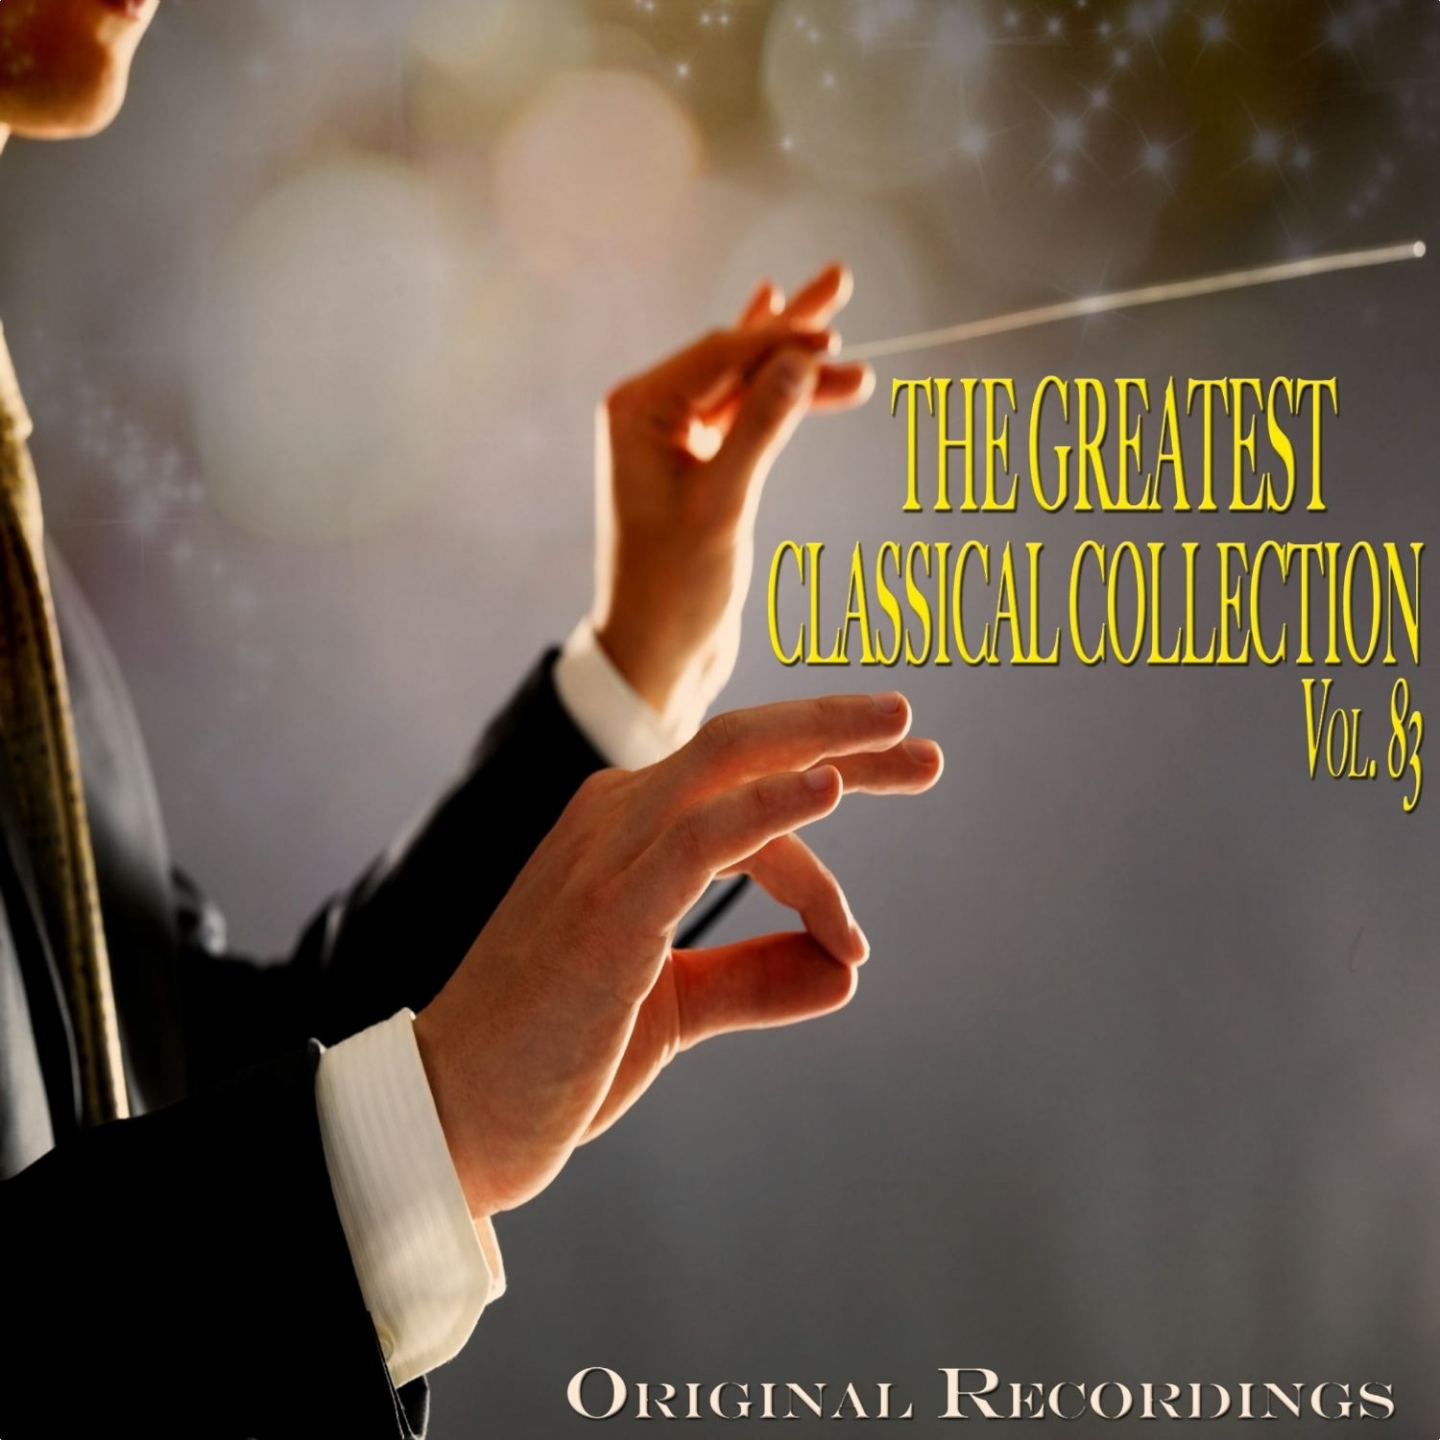 The Greatest Classical Collection Vol. 83